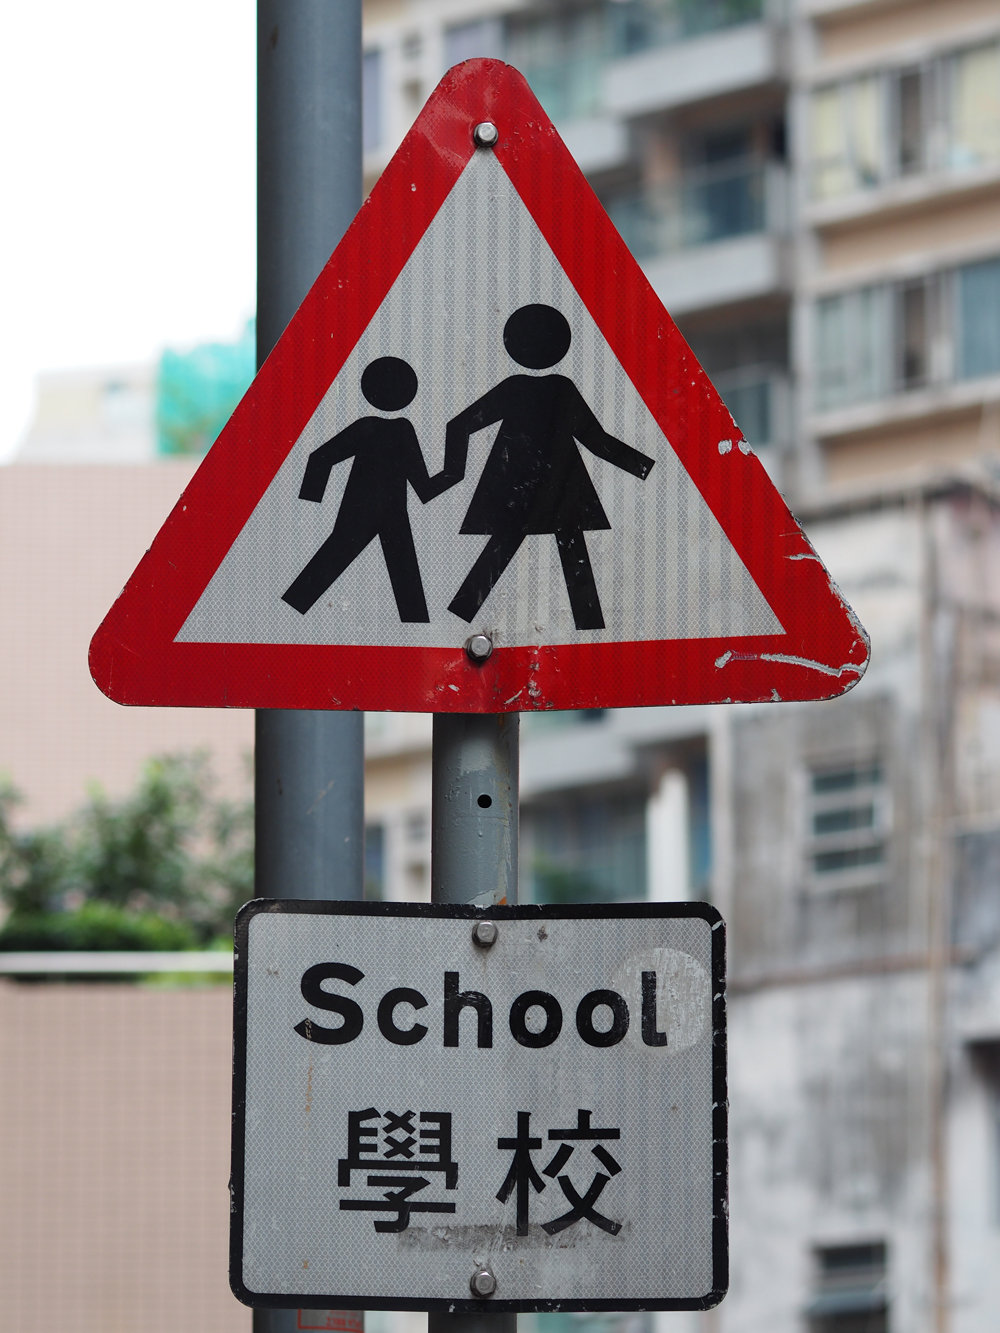 School safety is an increasing area of interest © Alexandre Tziripouloff | Dreamstime.com